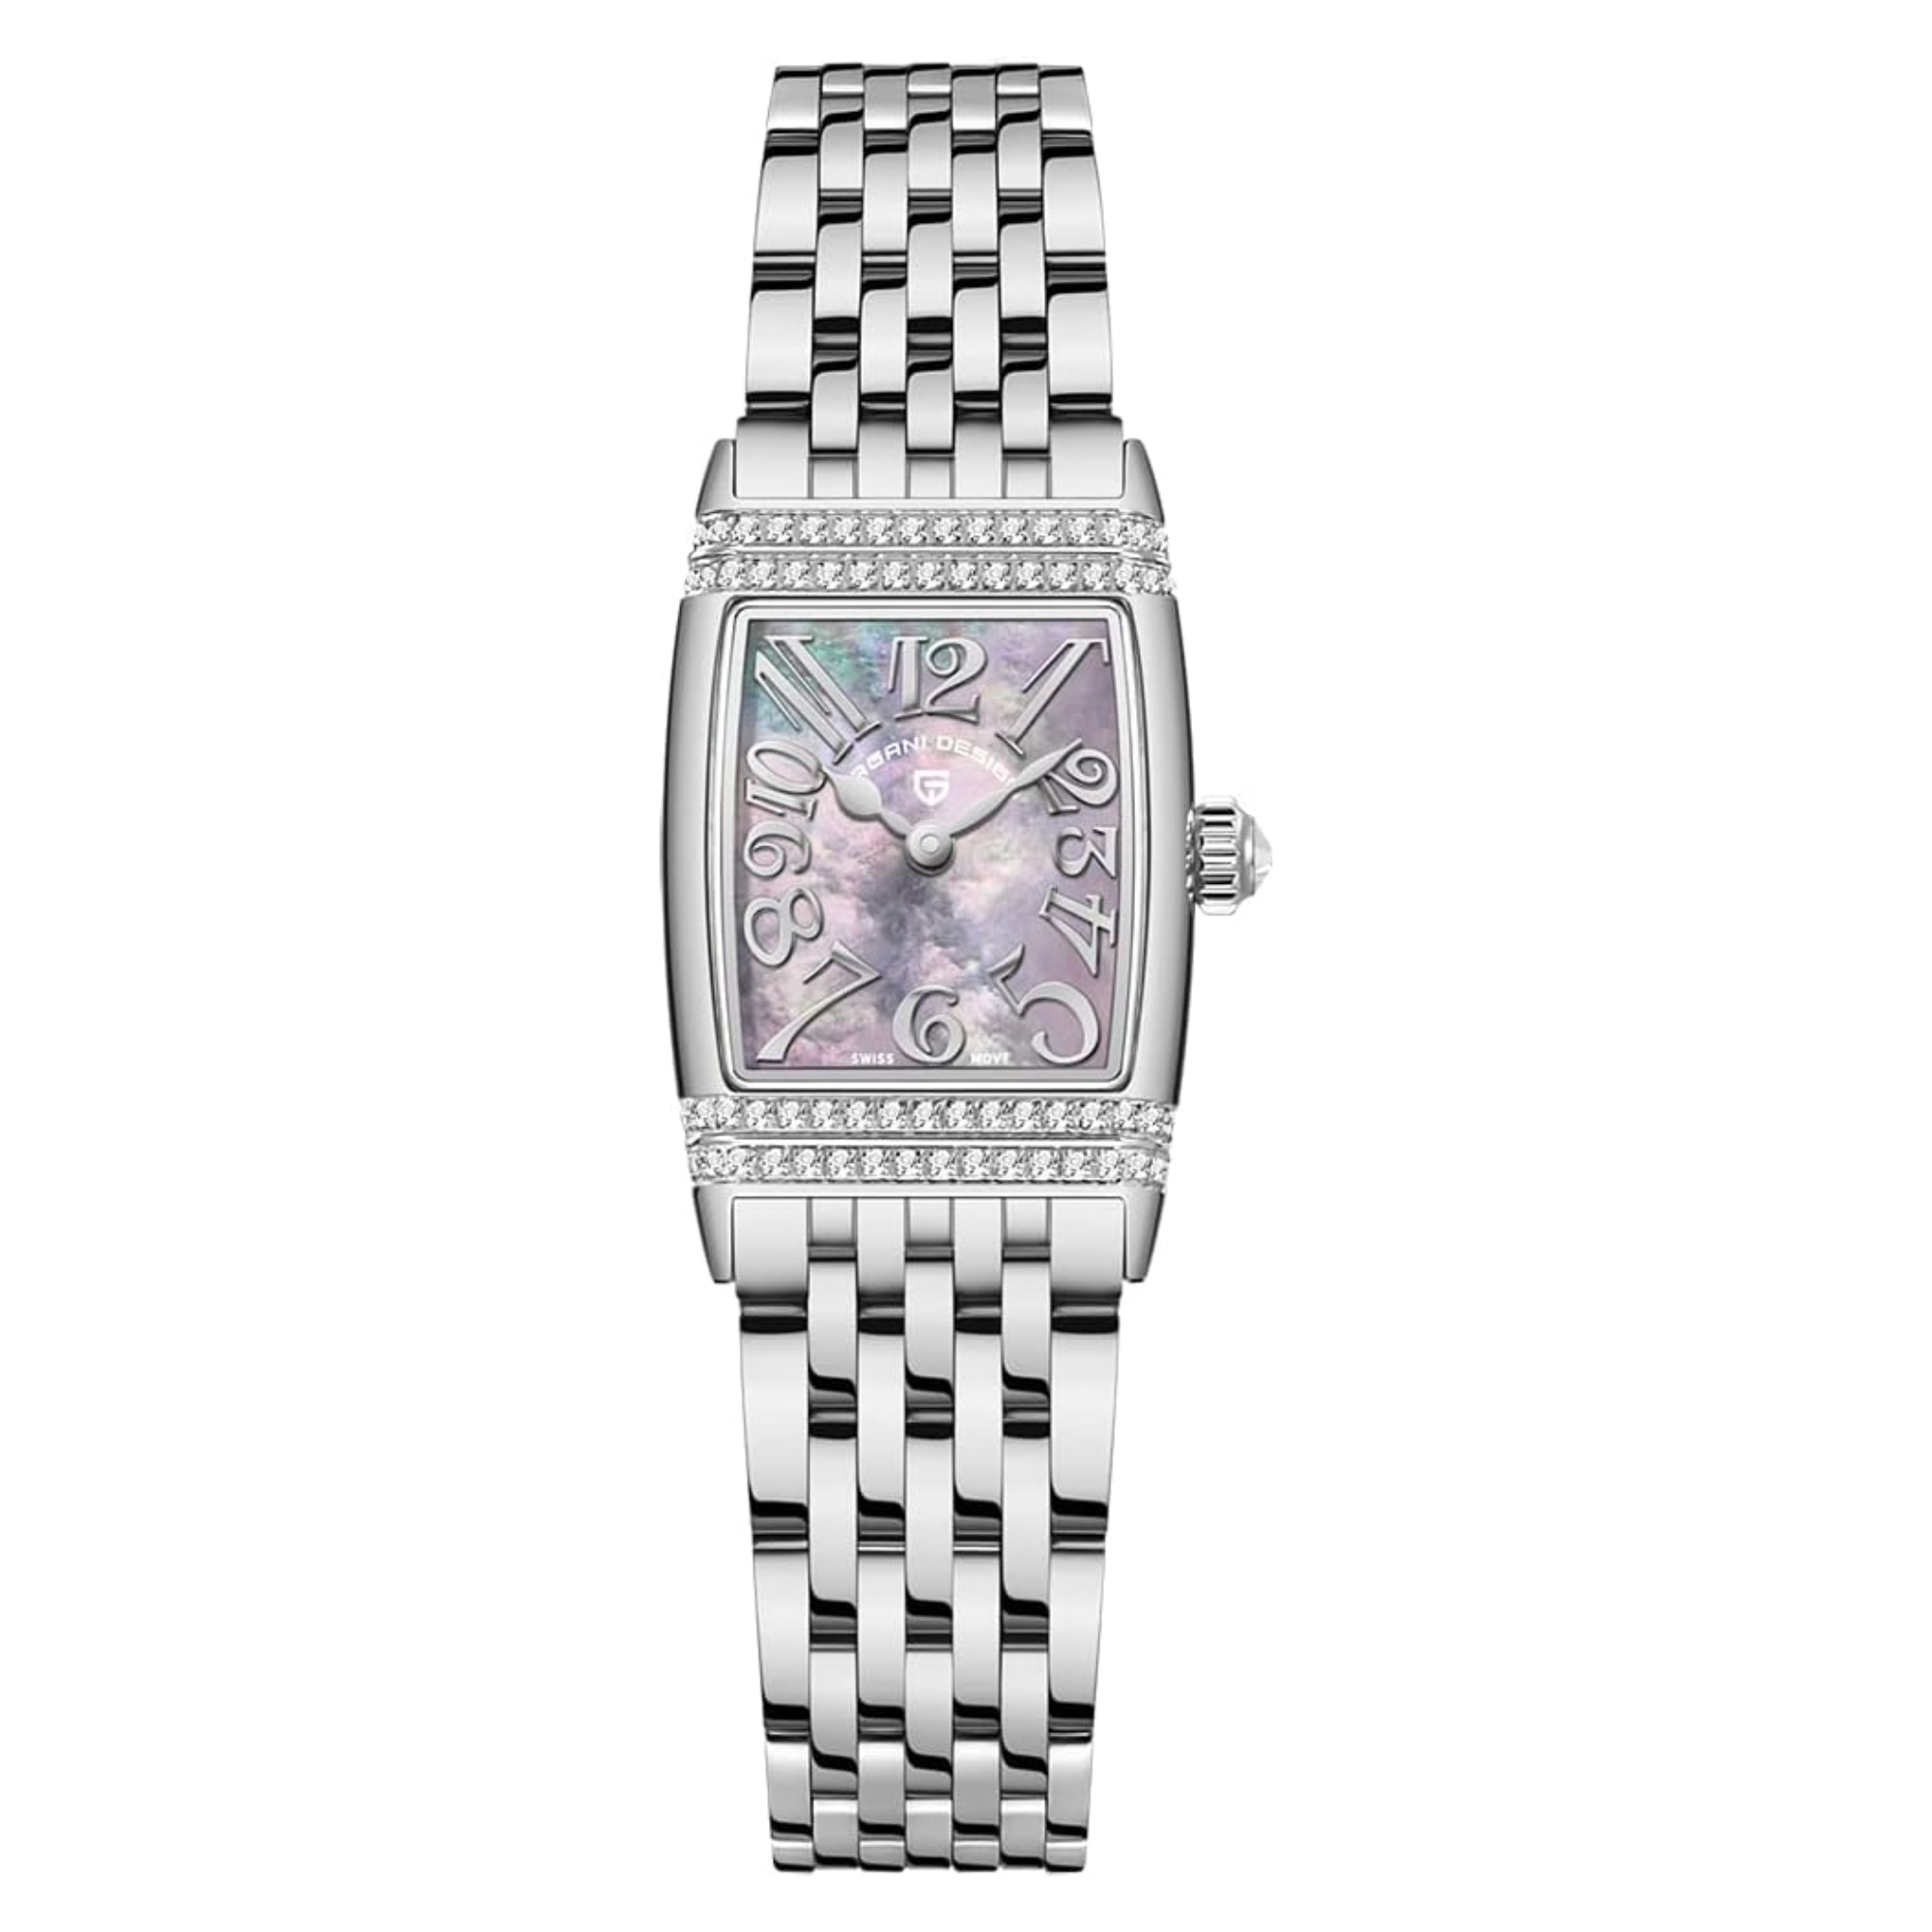 Pagani Design PD-1737 Women's Quartz Watches 22mm with Stone Set Rectangle Case, Analogue Display and Stainless Steel Ladies Watch - Silver - MOP Purple